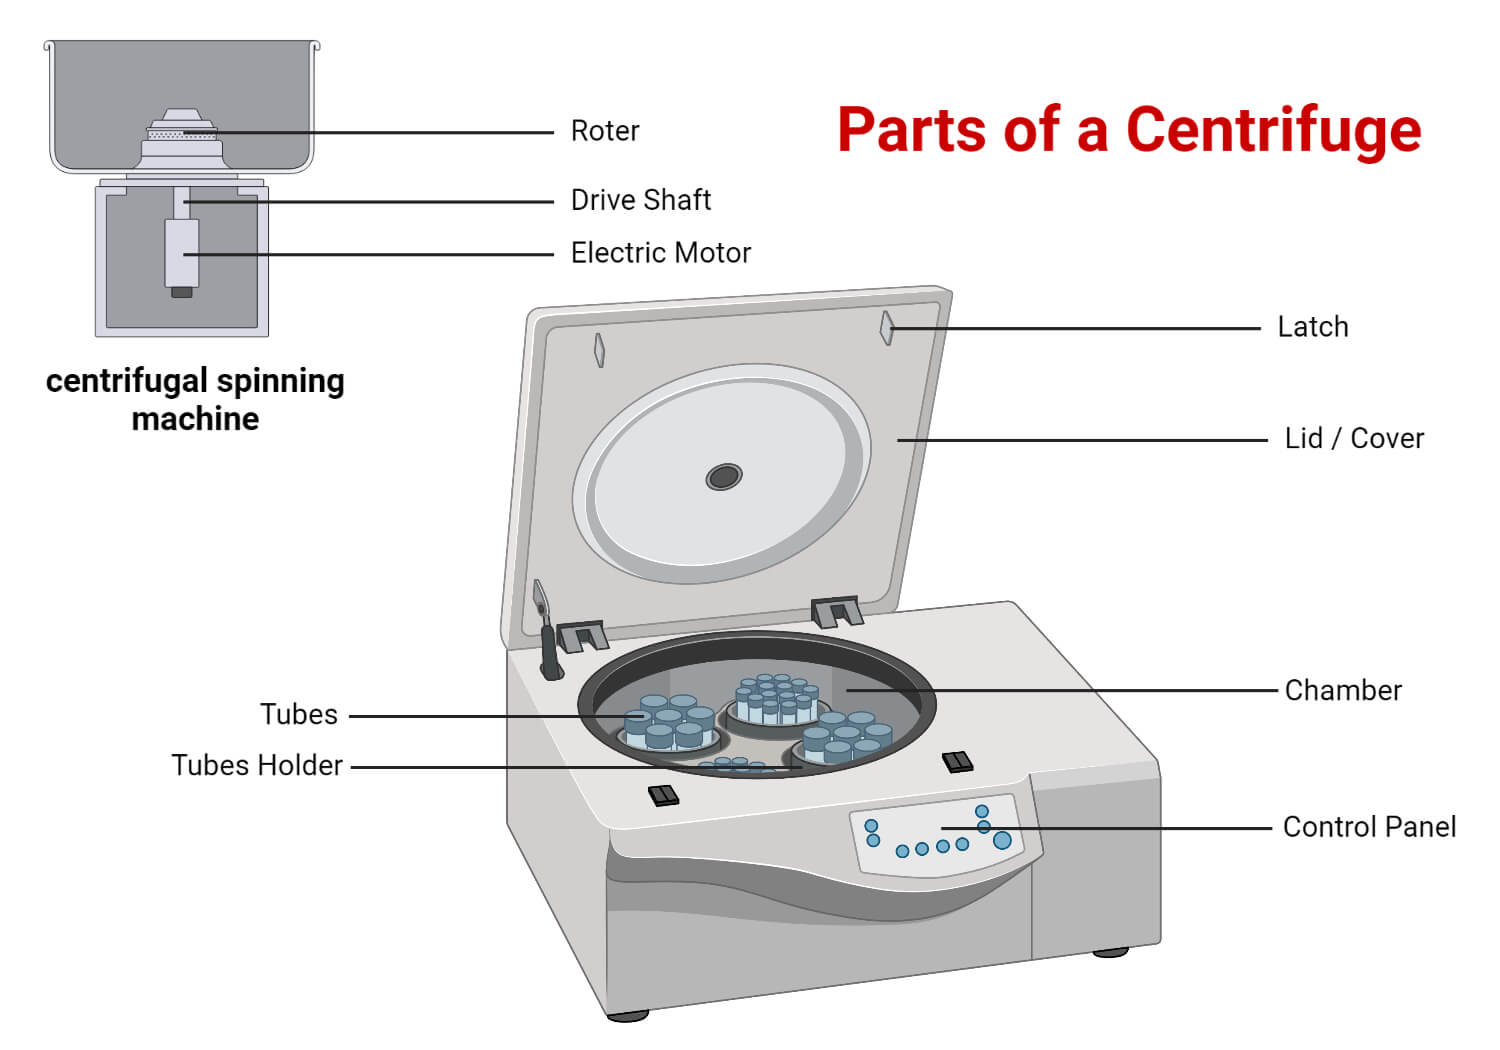 Parts of a Centrifuge